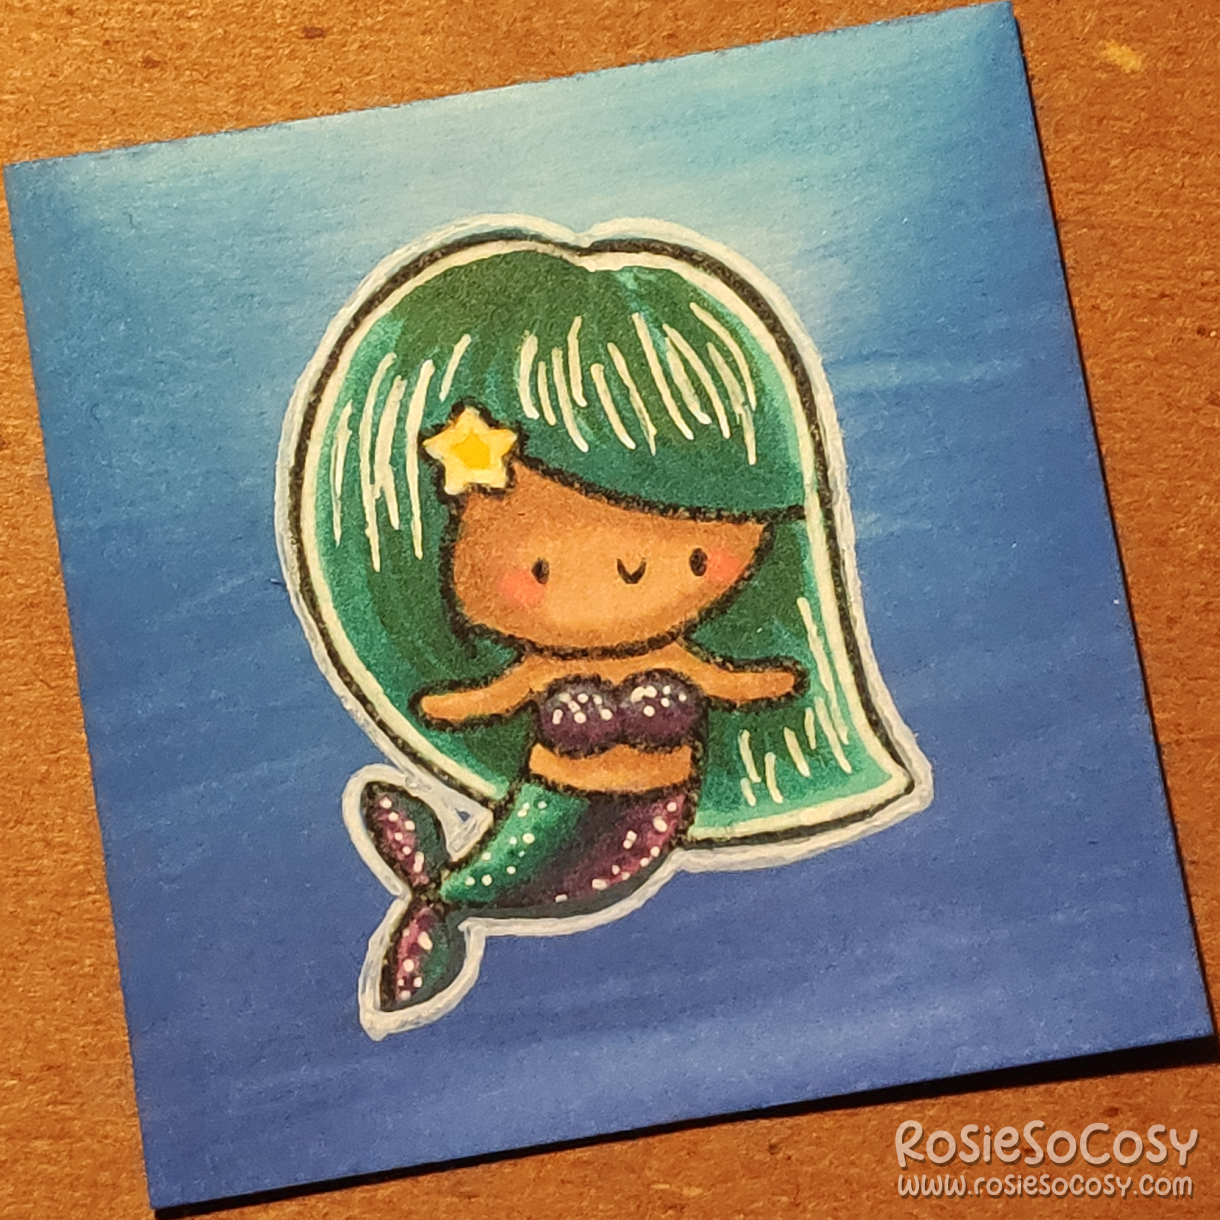 A tiny, 2 inch card with a cute mermaid on it. The mermaid is submerged in the blue sea, with light coming from above. The mermaid has seafoam/teal hair, and a purple/teal tail/top. She has a medium/tan skin tone and a cute yellow star in her hair.